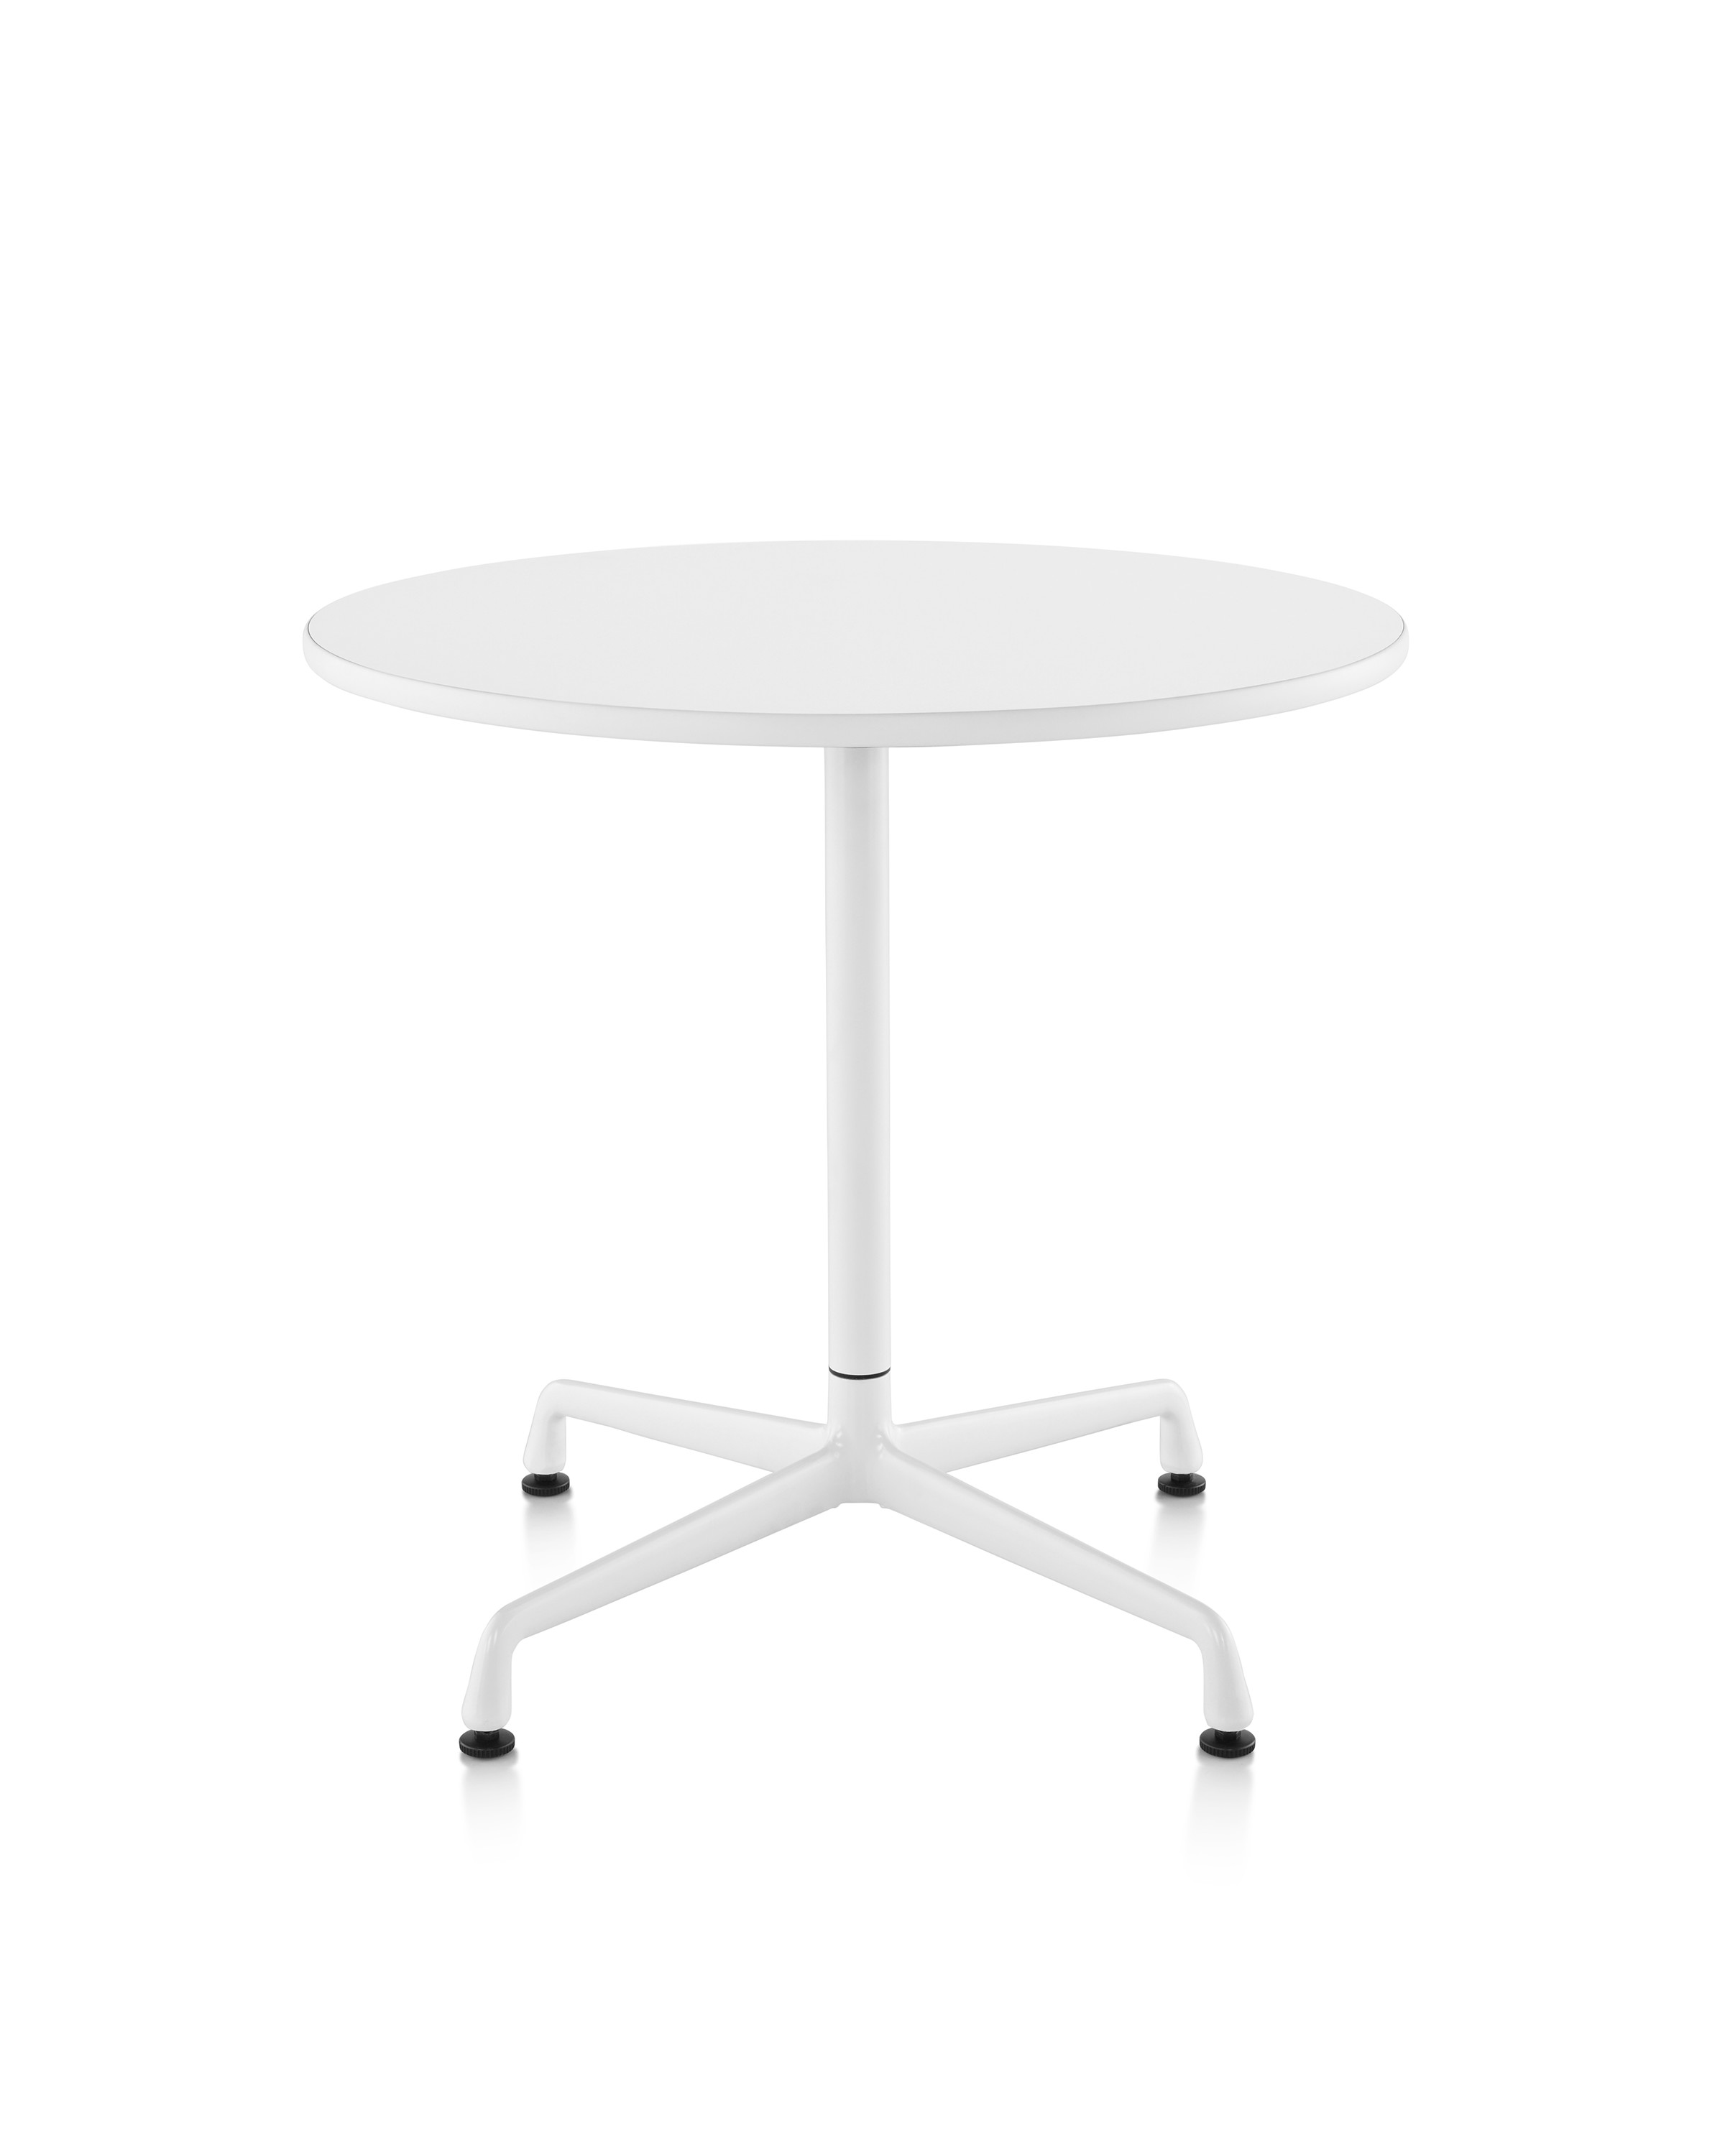 Eames Round Table Universal Base, Eames Round Table